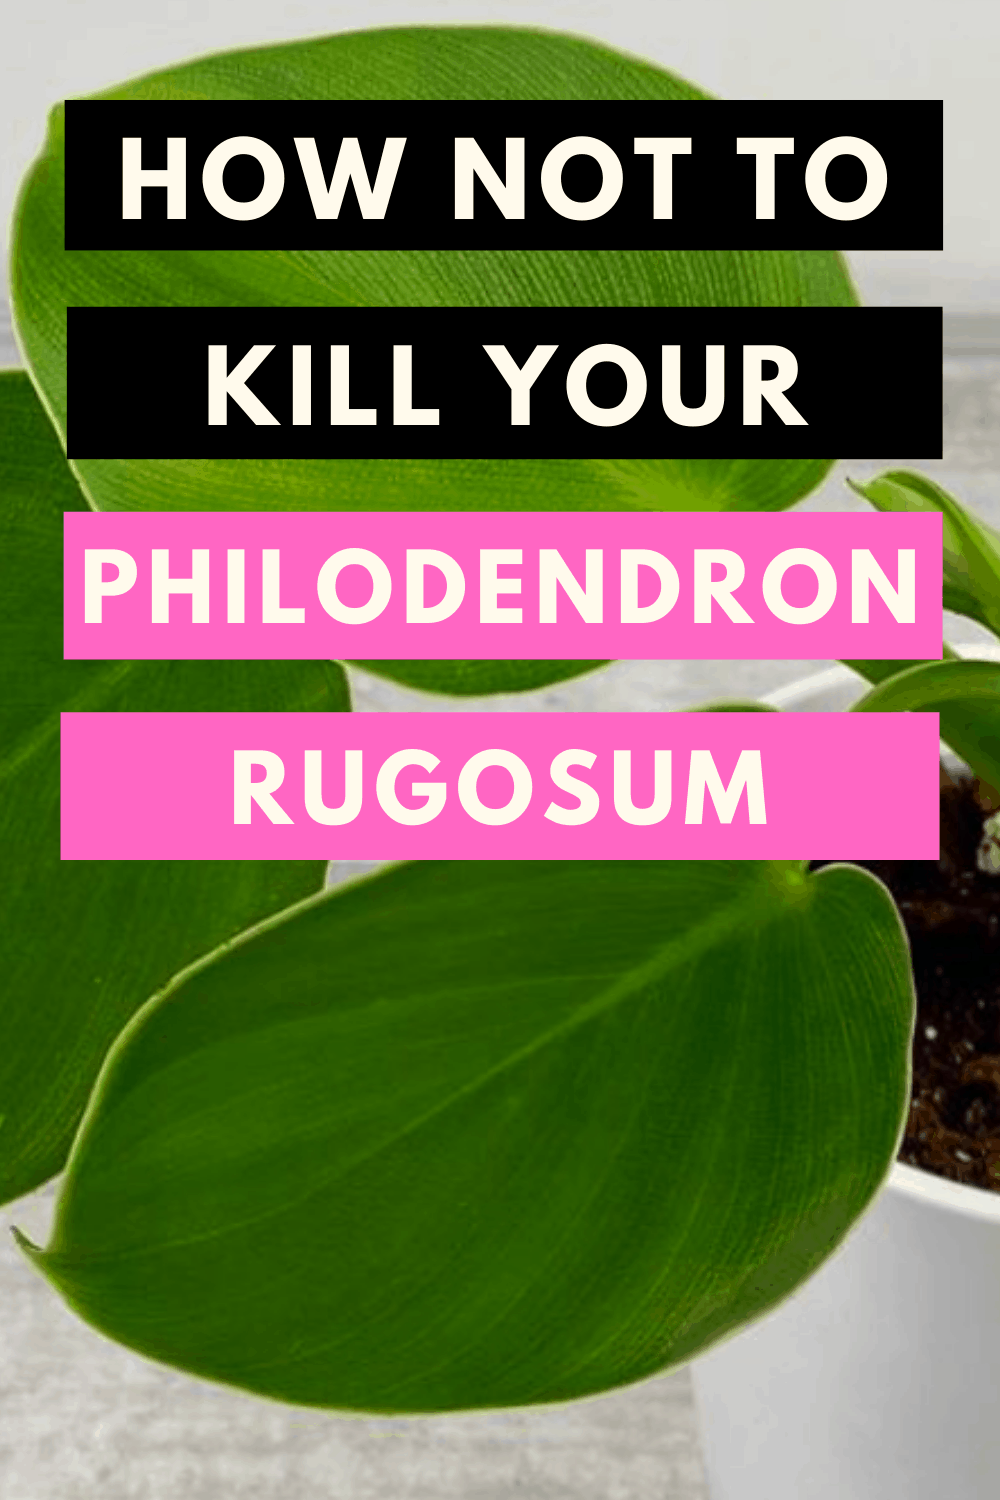 How Not To Kill Your Philodendron Rugosum